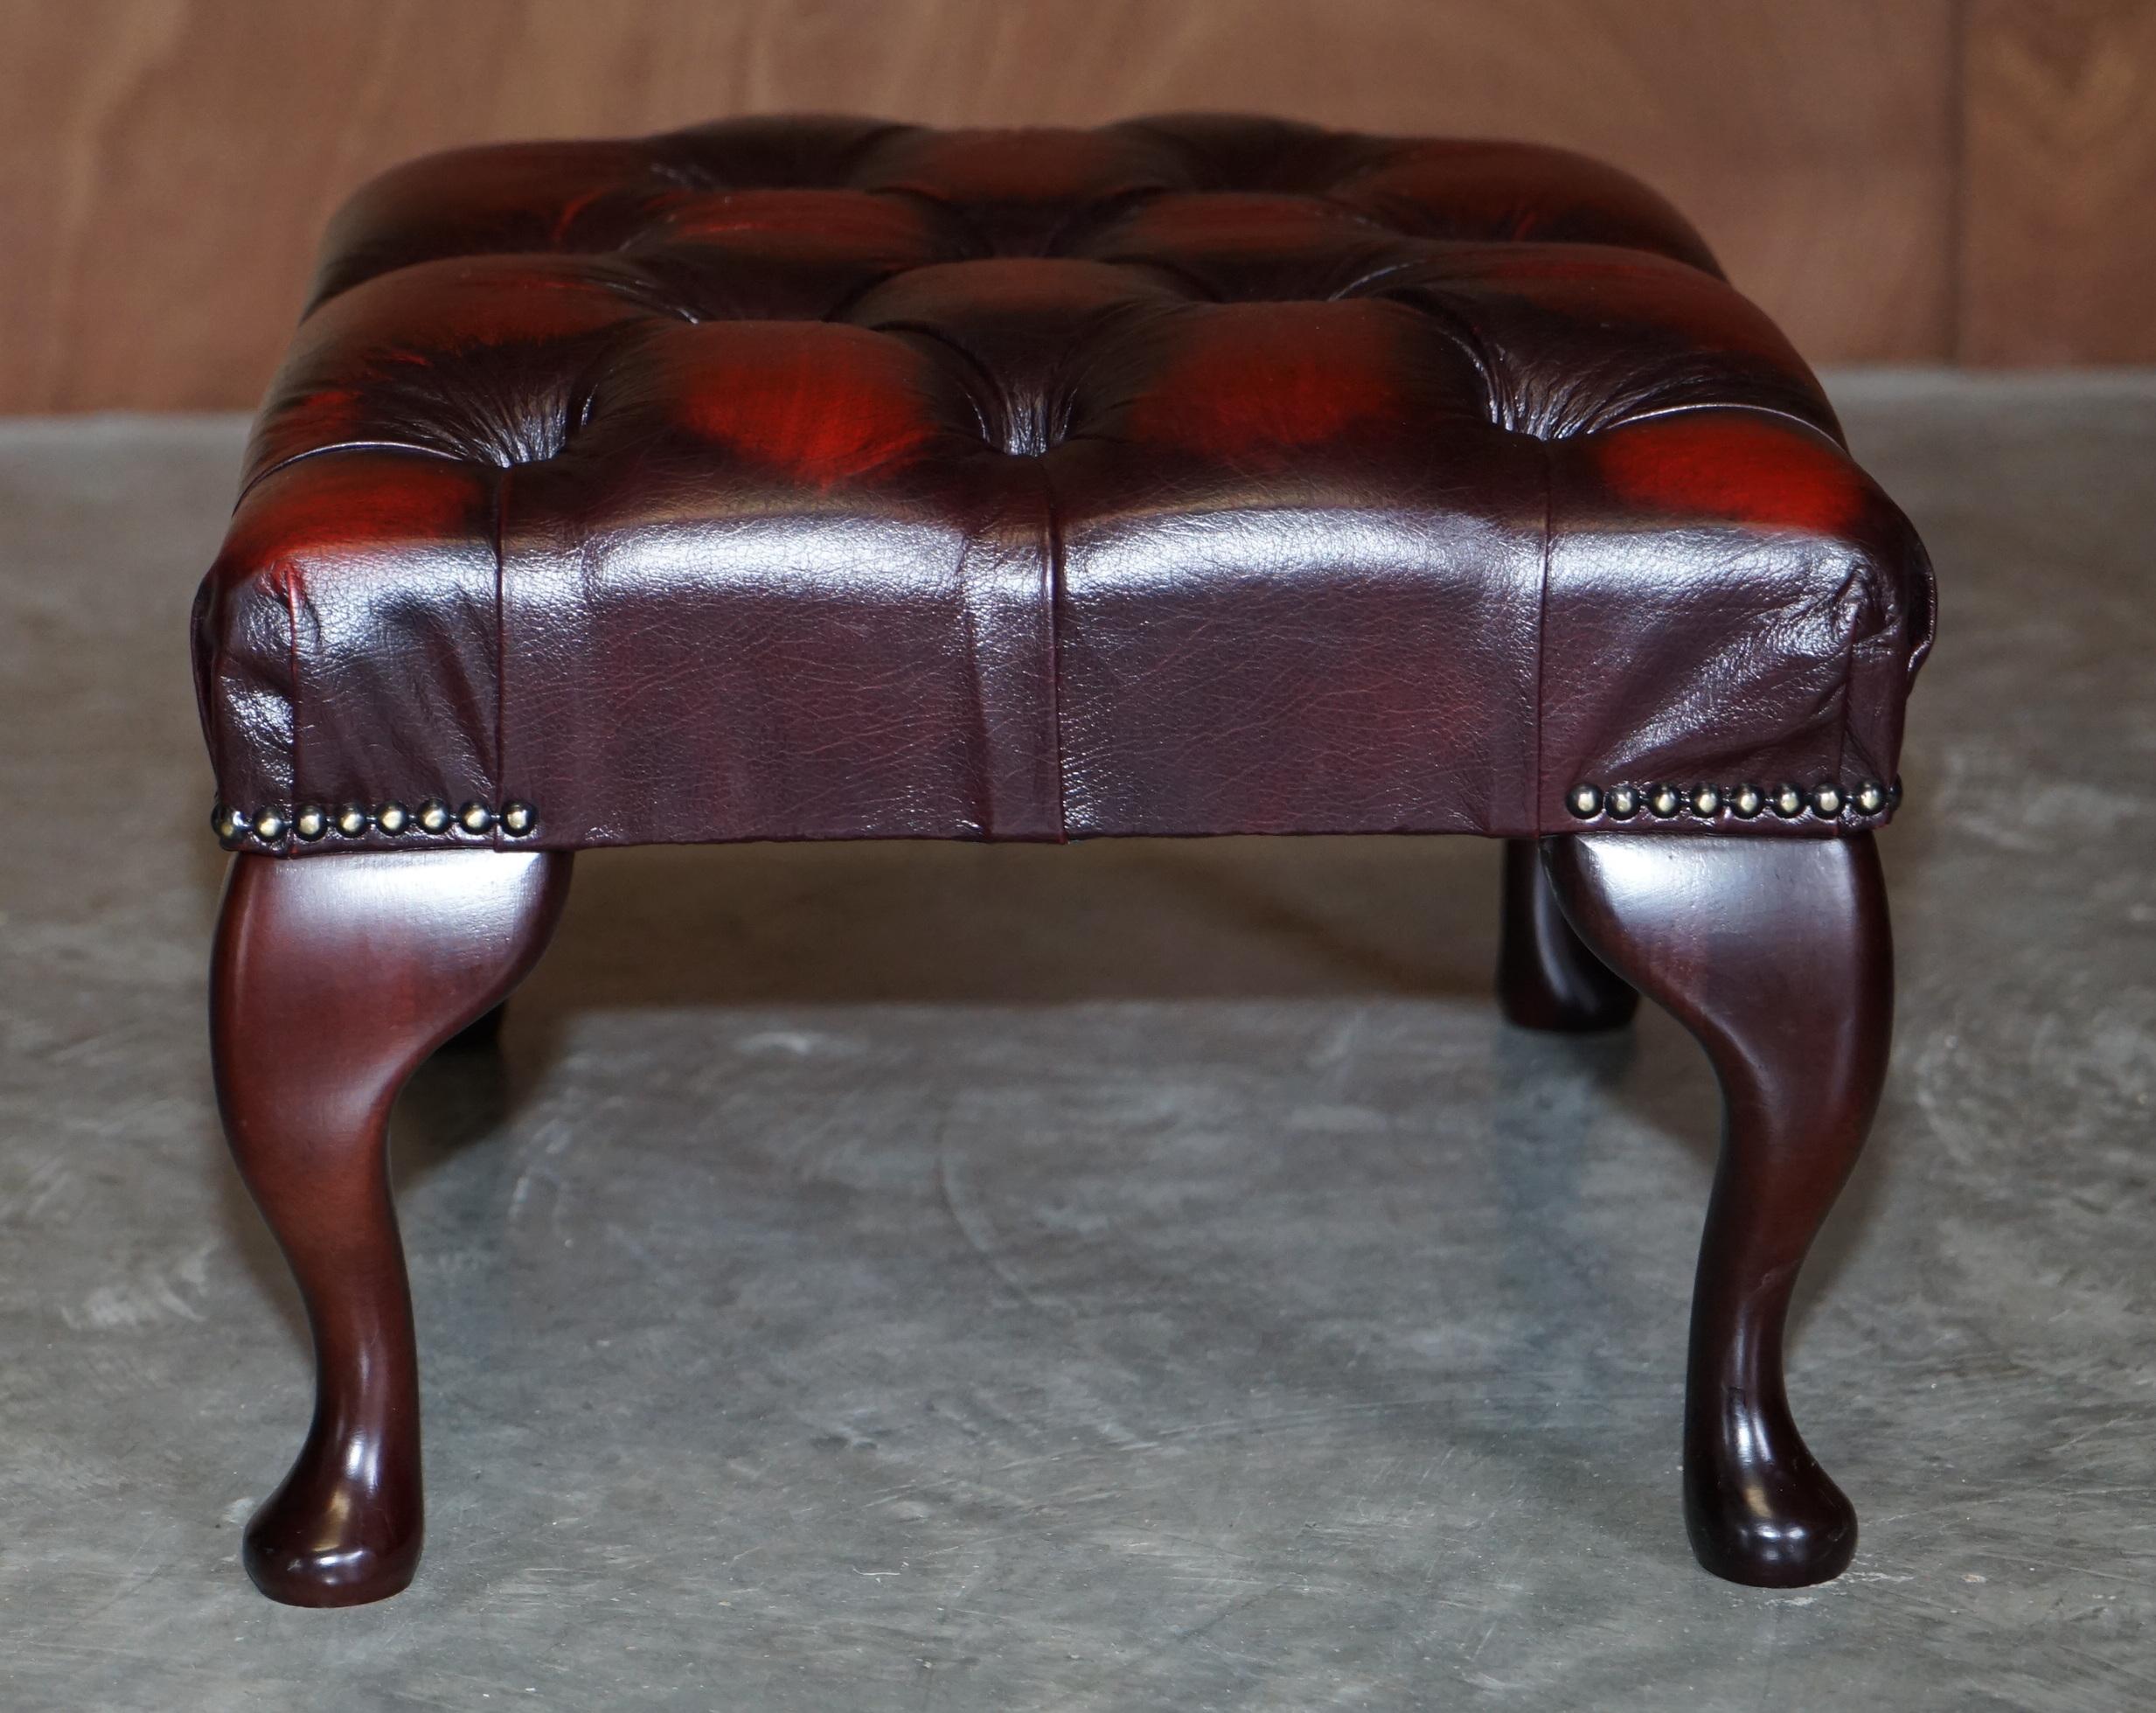 20th Century Lovely Oxblood Leather Chesterfield Footstool Ottoman Beech Wood Cabriolet Legs